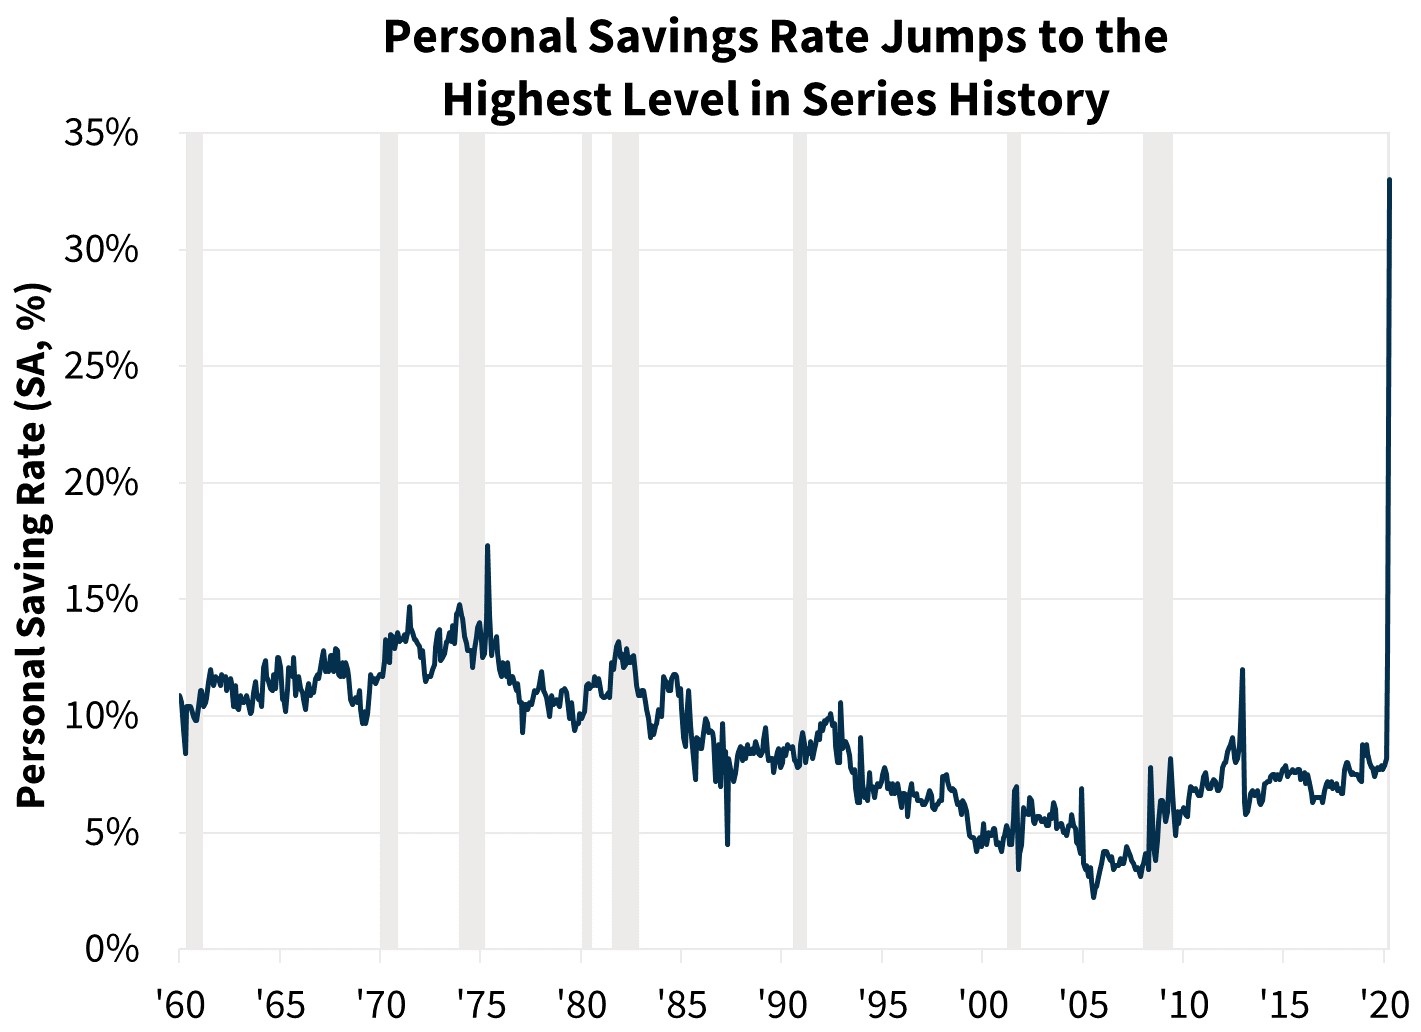  Personal Savings Rate Jumps to the Highest Level in Series History